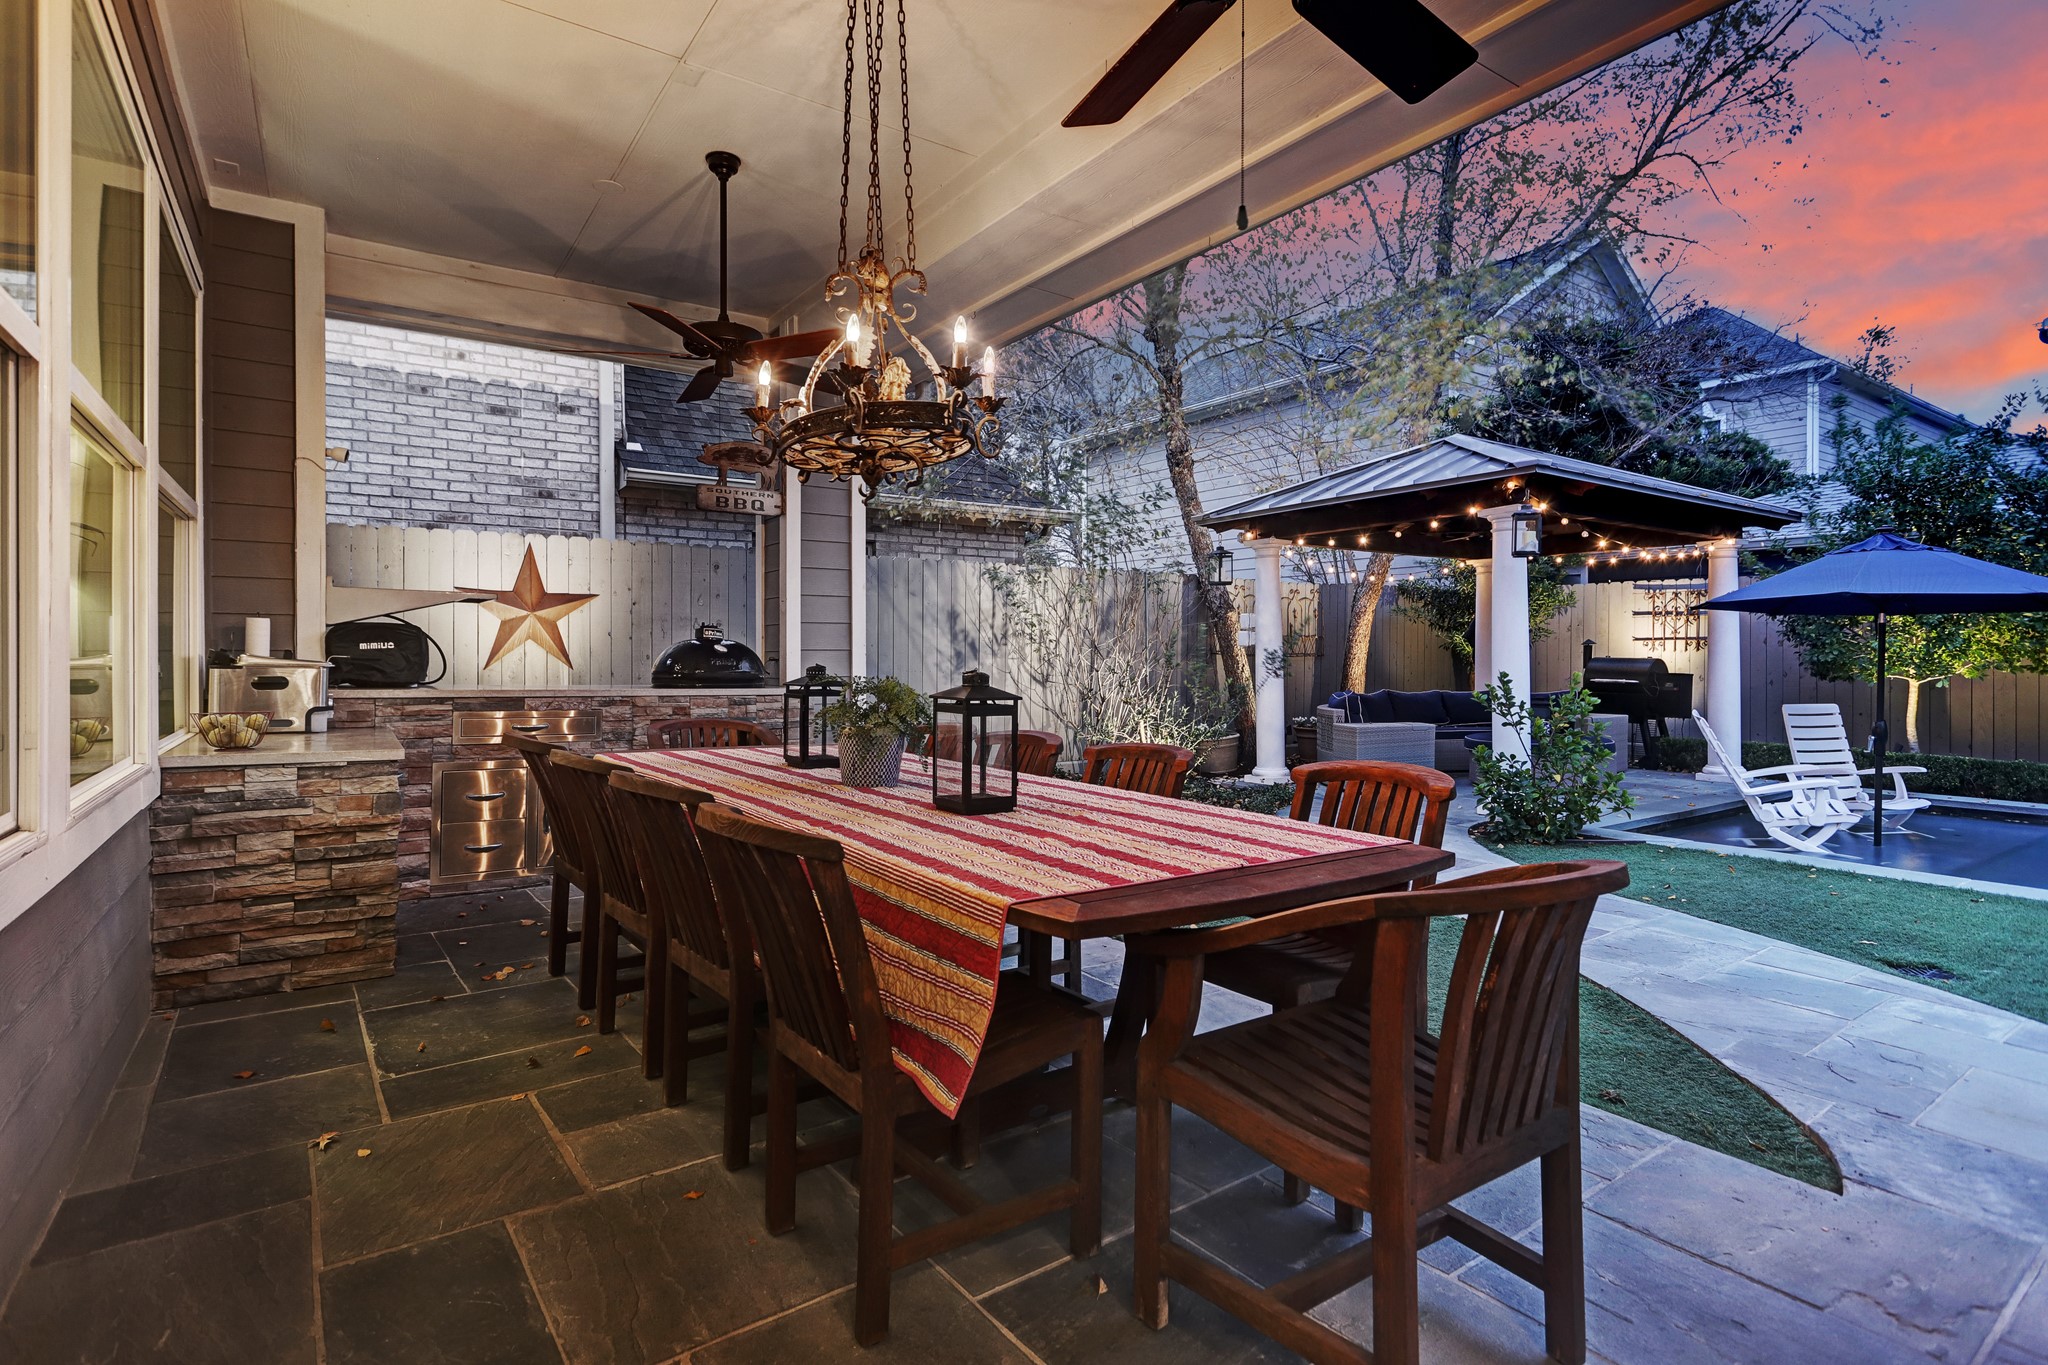 View of the outdoor kitchen and pergola.